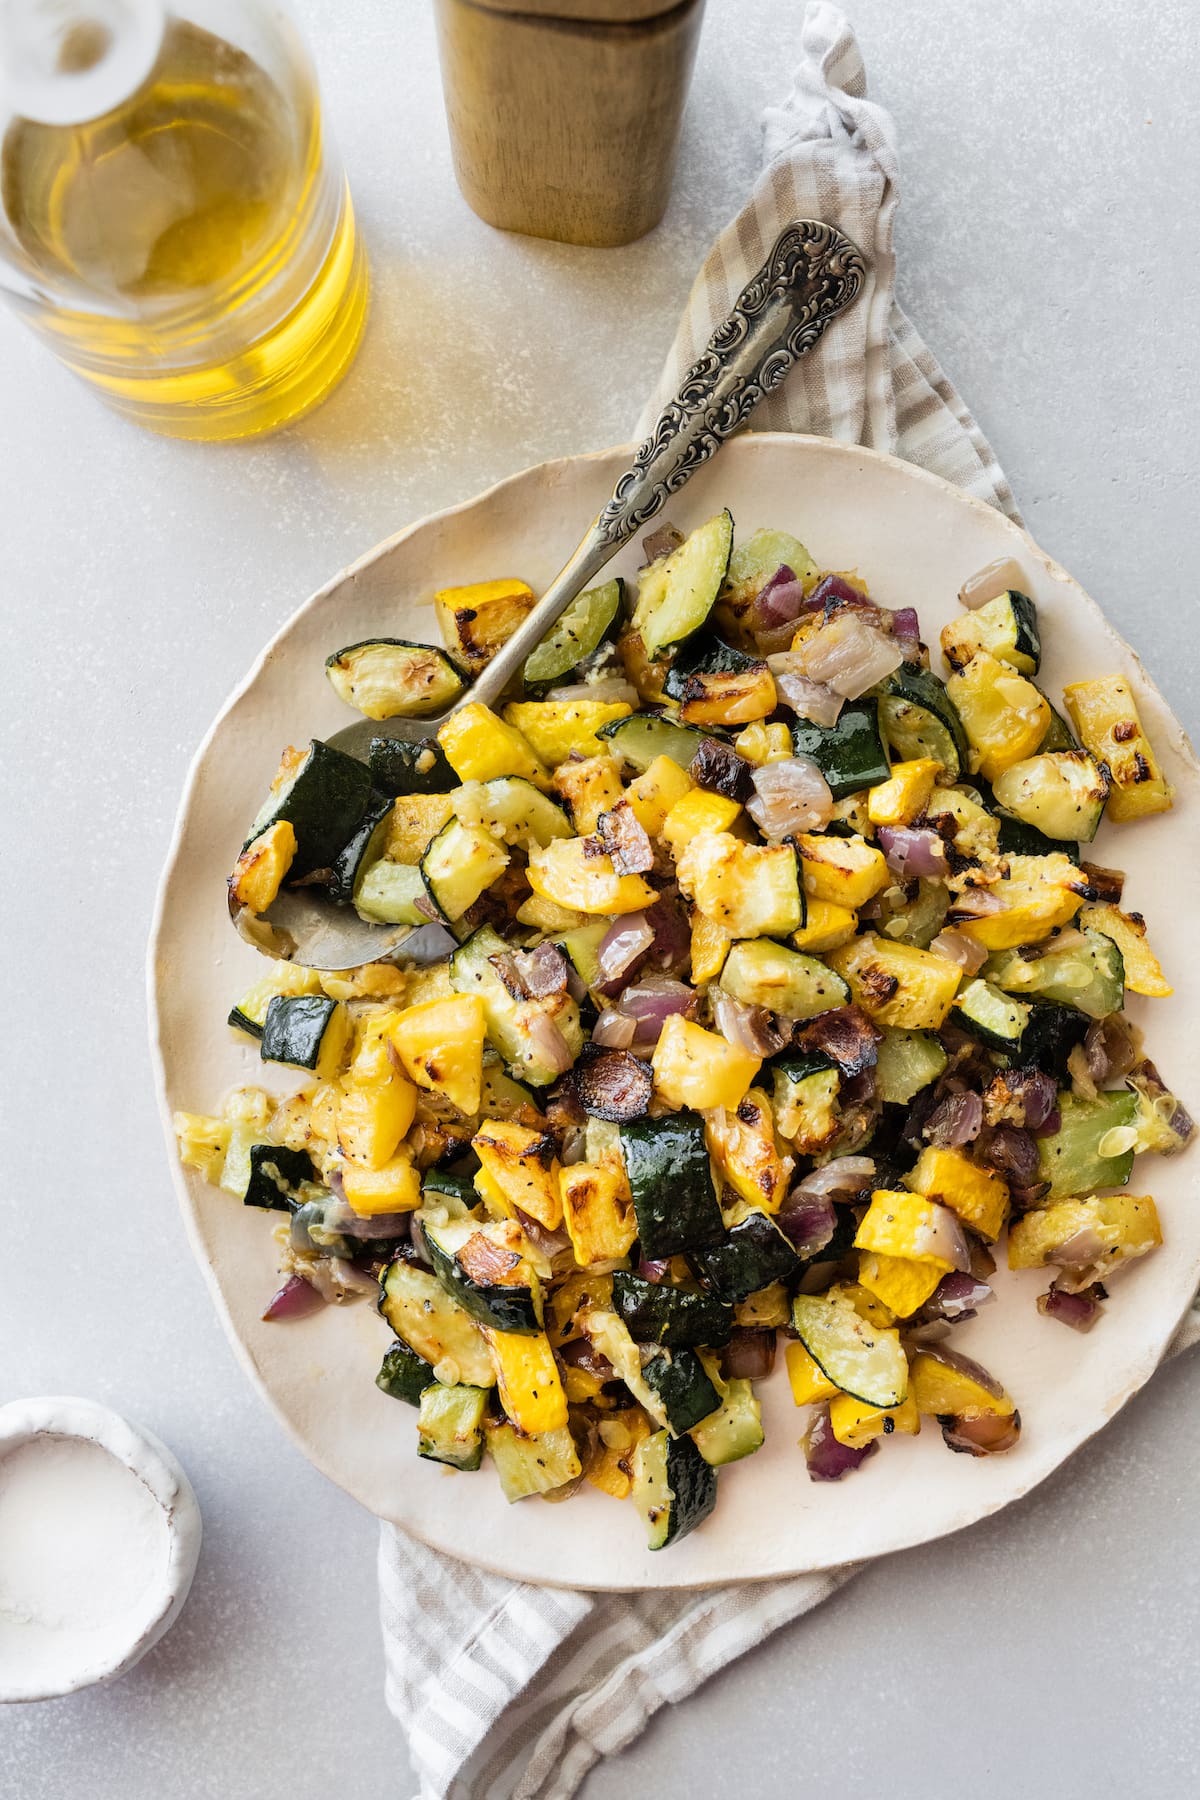 Roasted zucchini and squash on a white plate with a metal spoon.